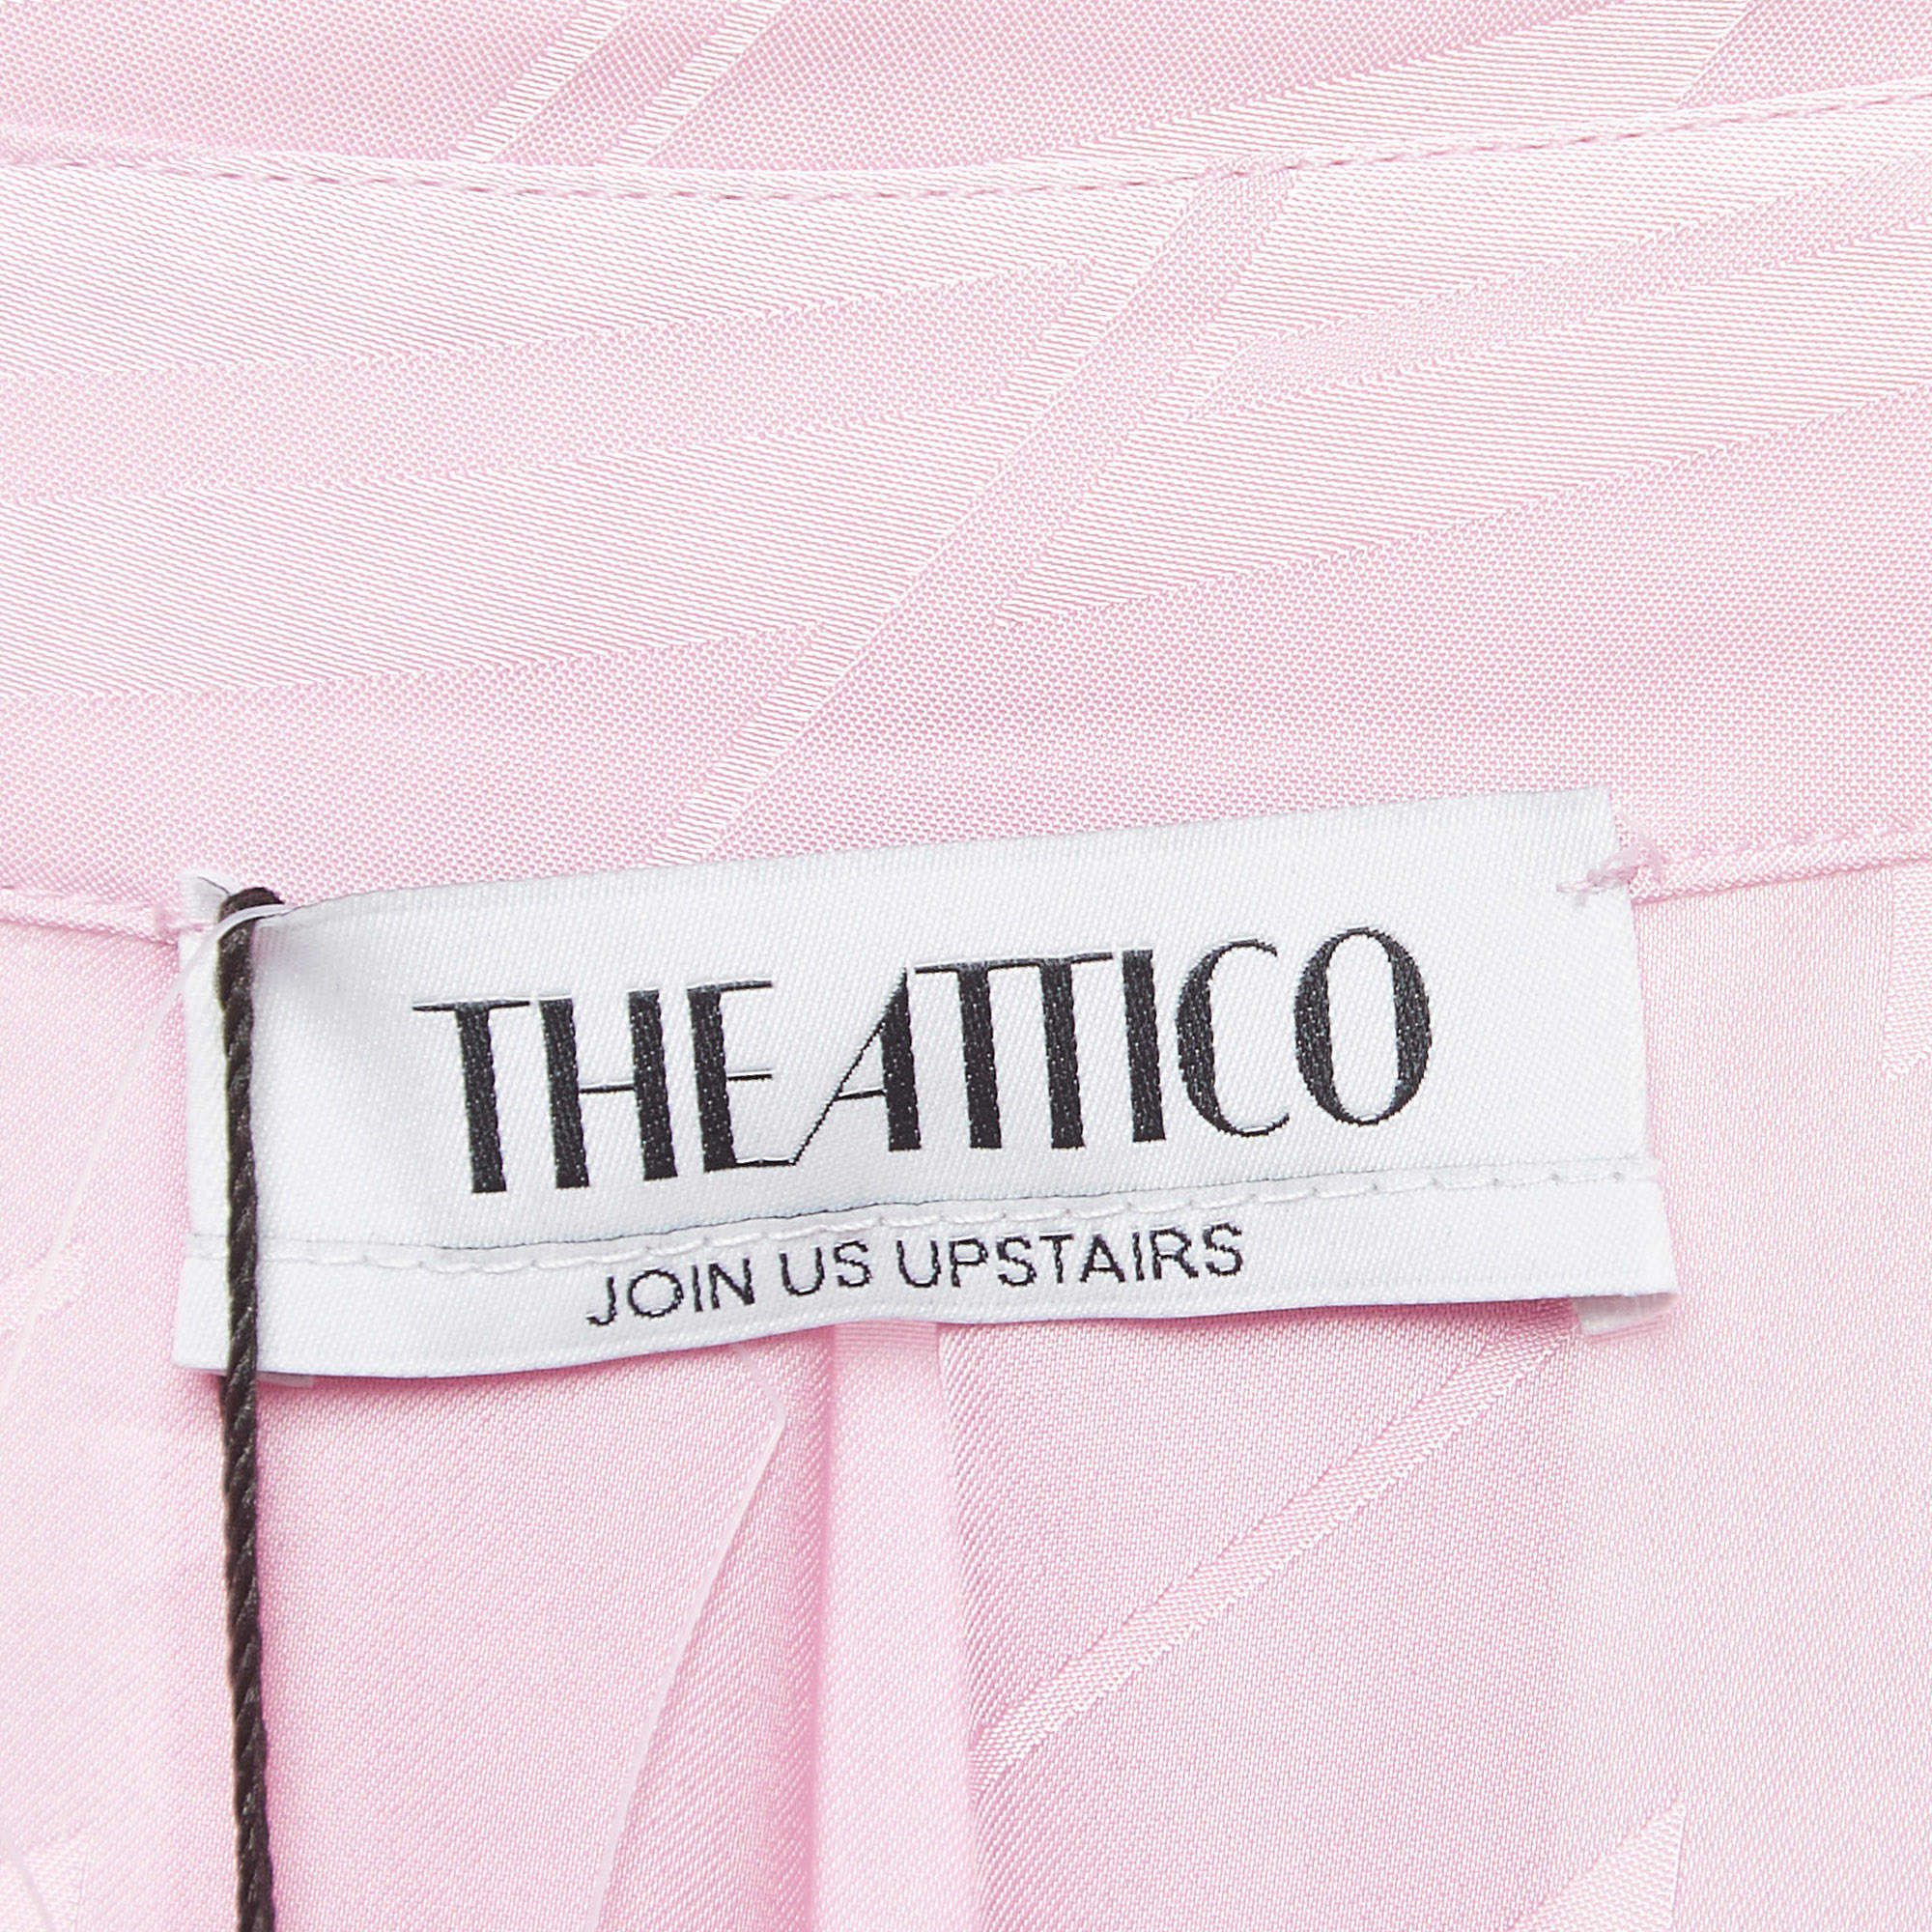 The attico - Join us upstairs